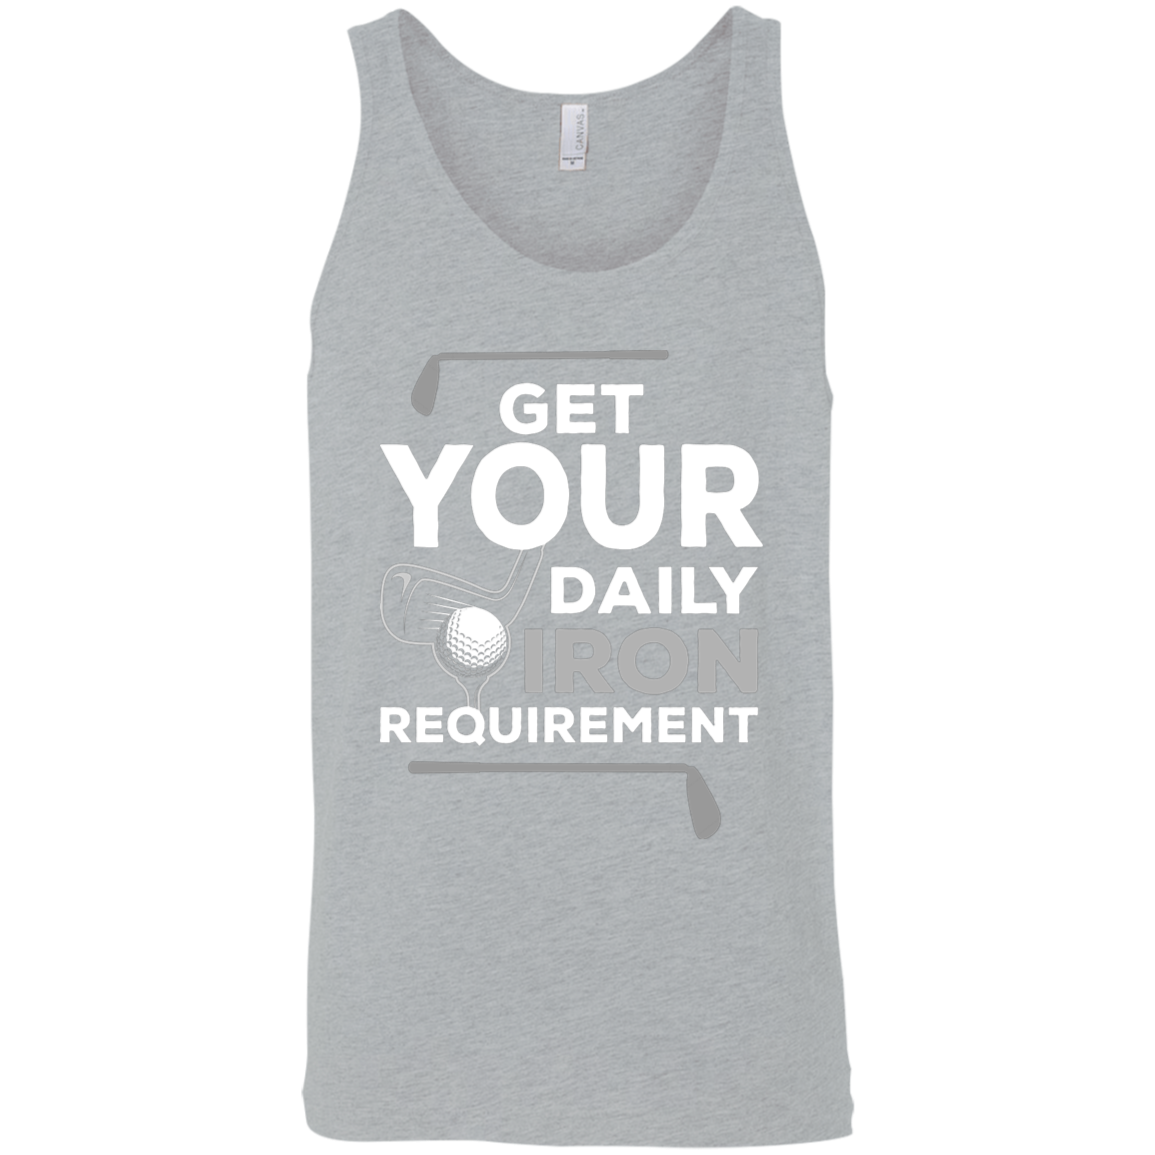 Get Your Daily Iron Requirement Tank Top Apparel - The Beer Lodge